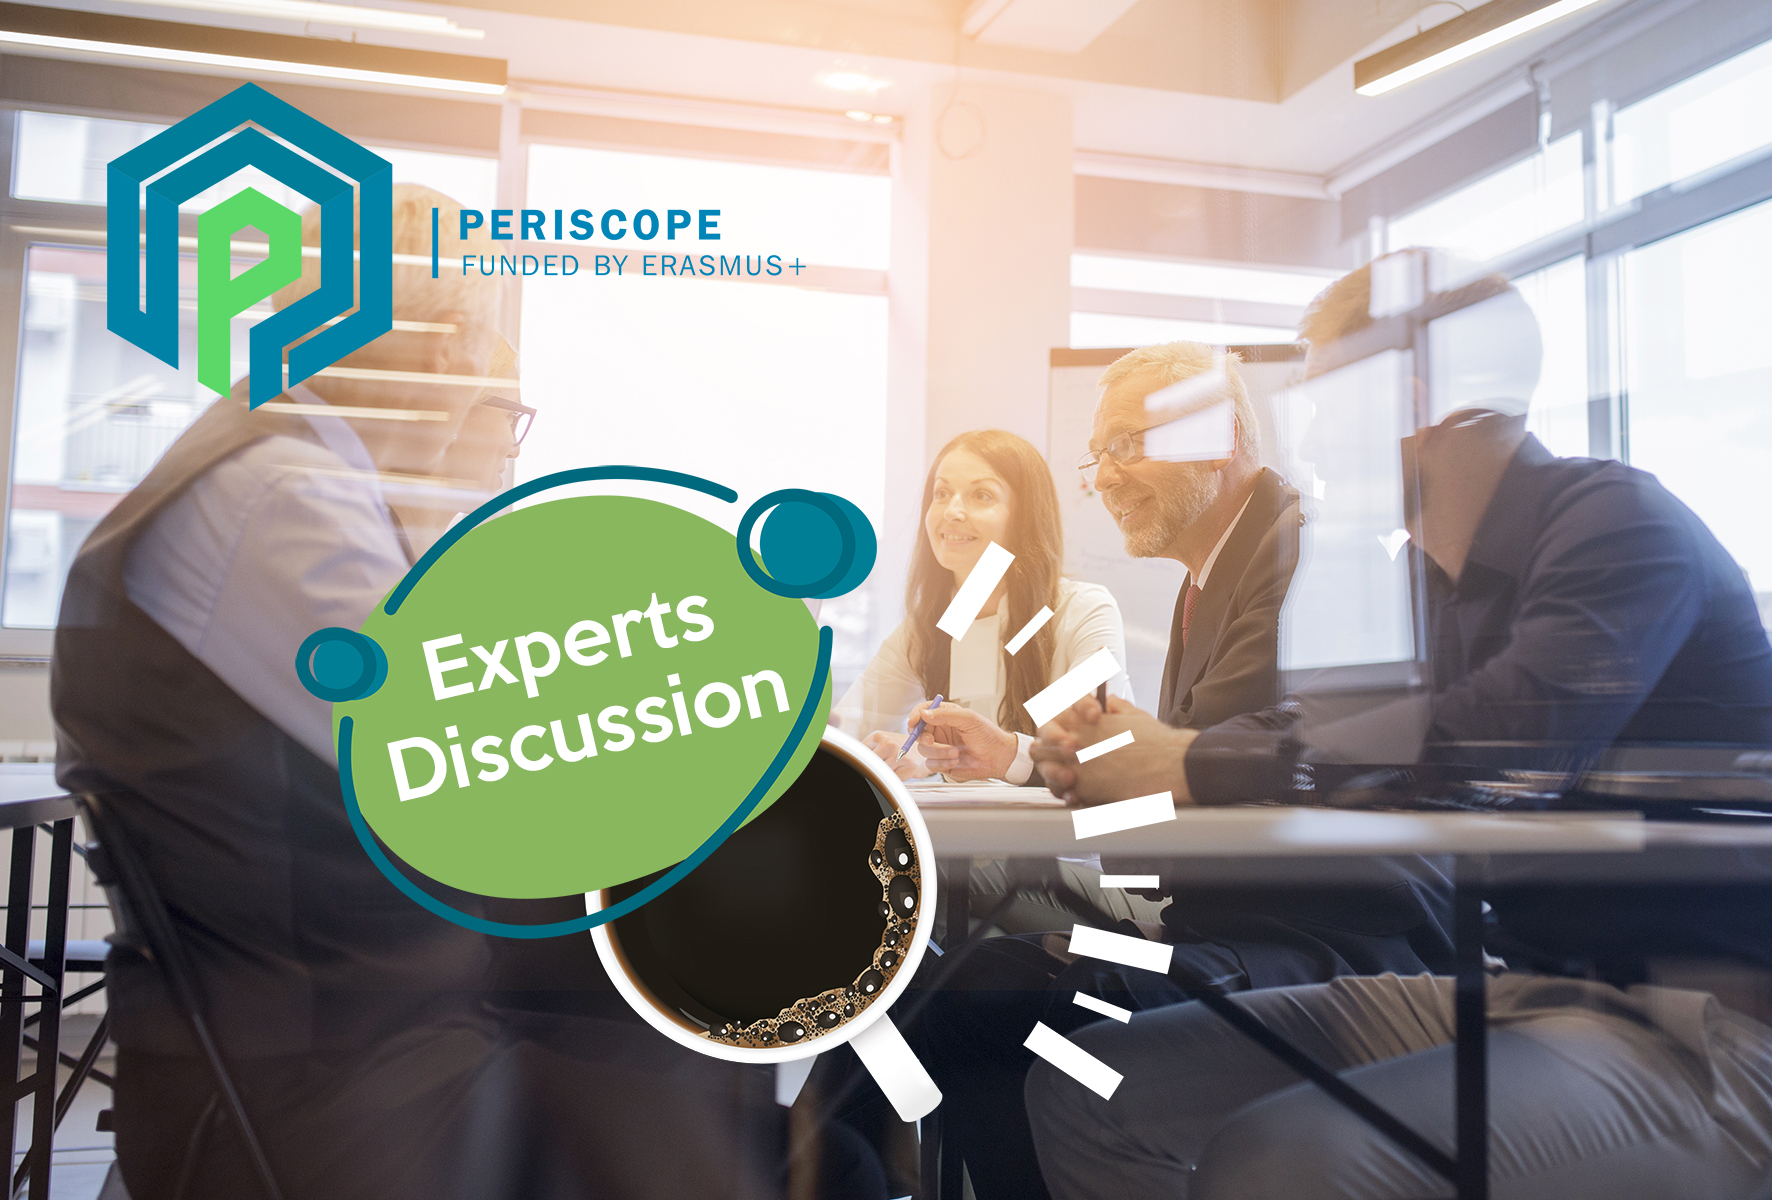 Experts discussion event June 26th!